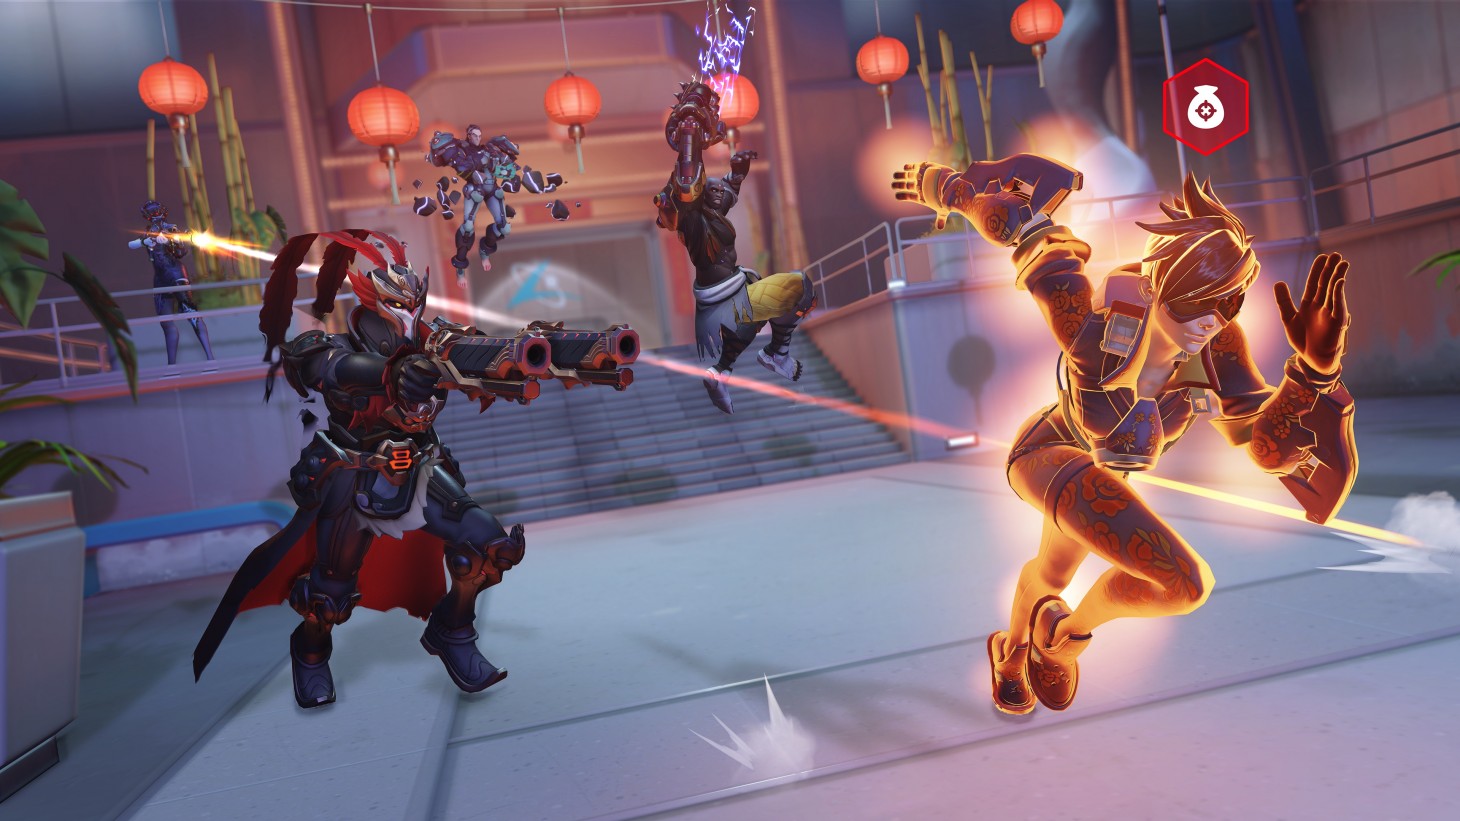 Check Out All Of The New Skins For Overwatch's Lunar New Year Event